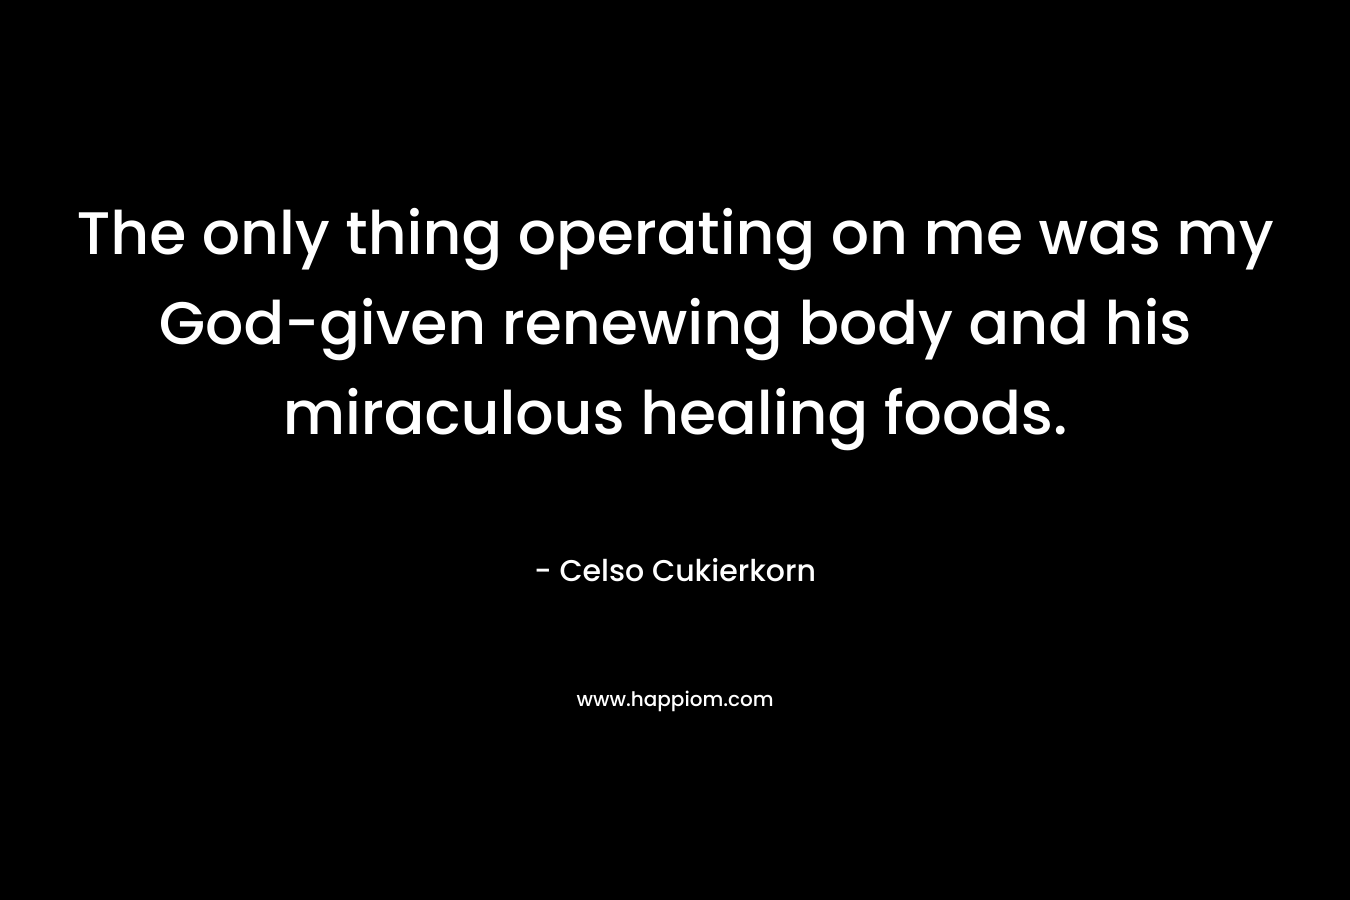 The only thing operating on me was my God-given renewing body and his miraculous healing foods. – Celso Cukierkorn